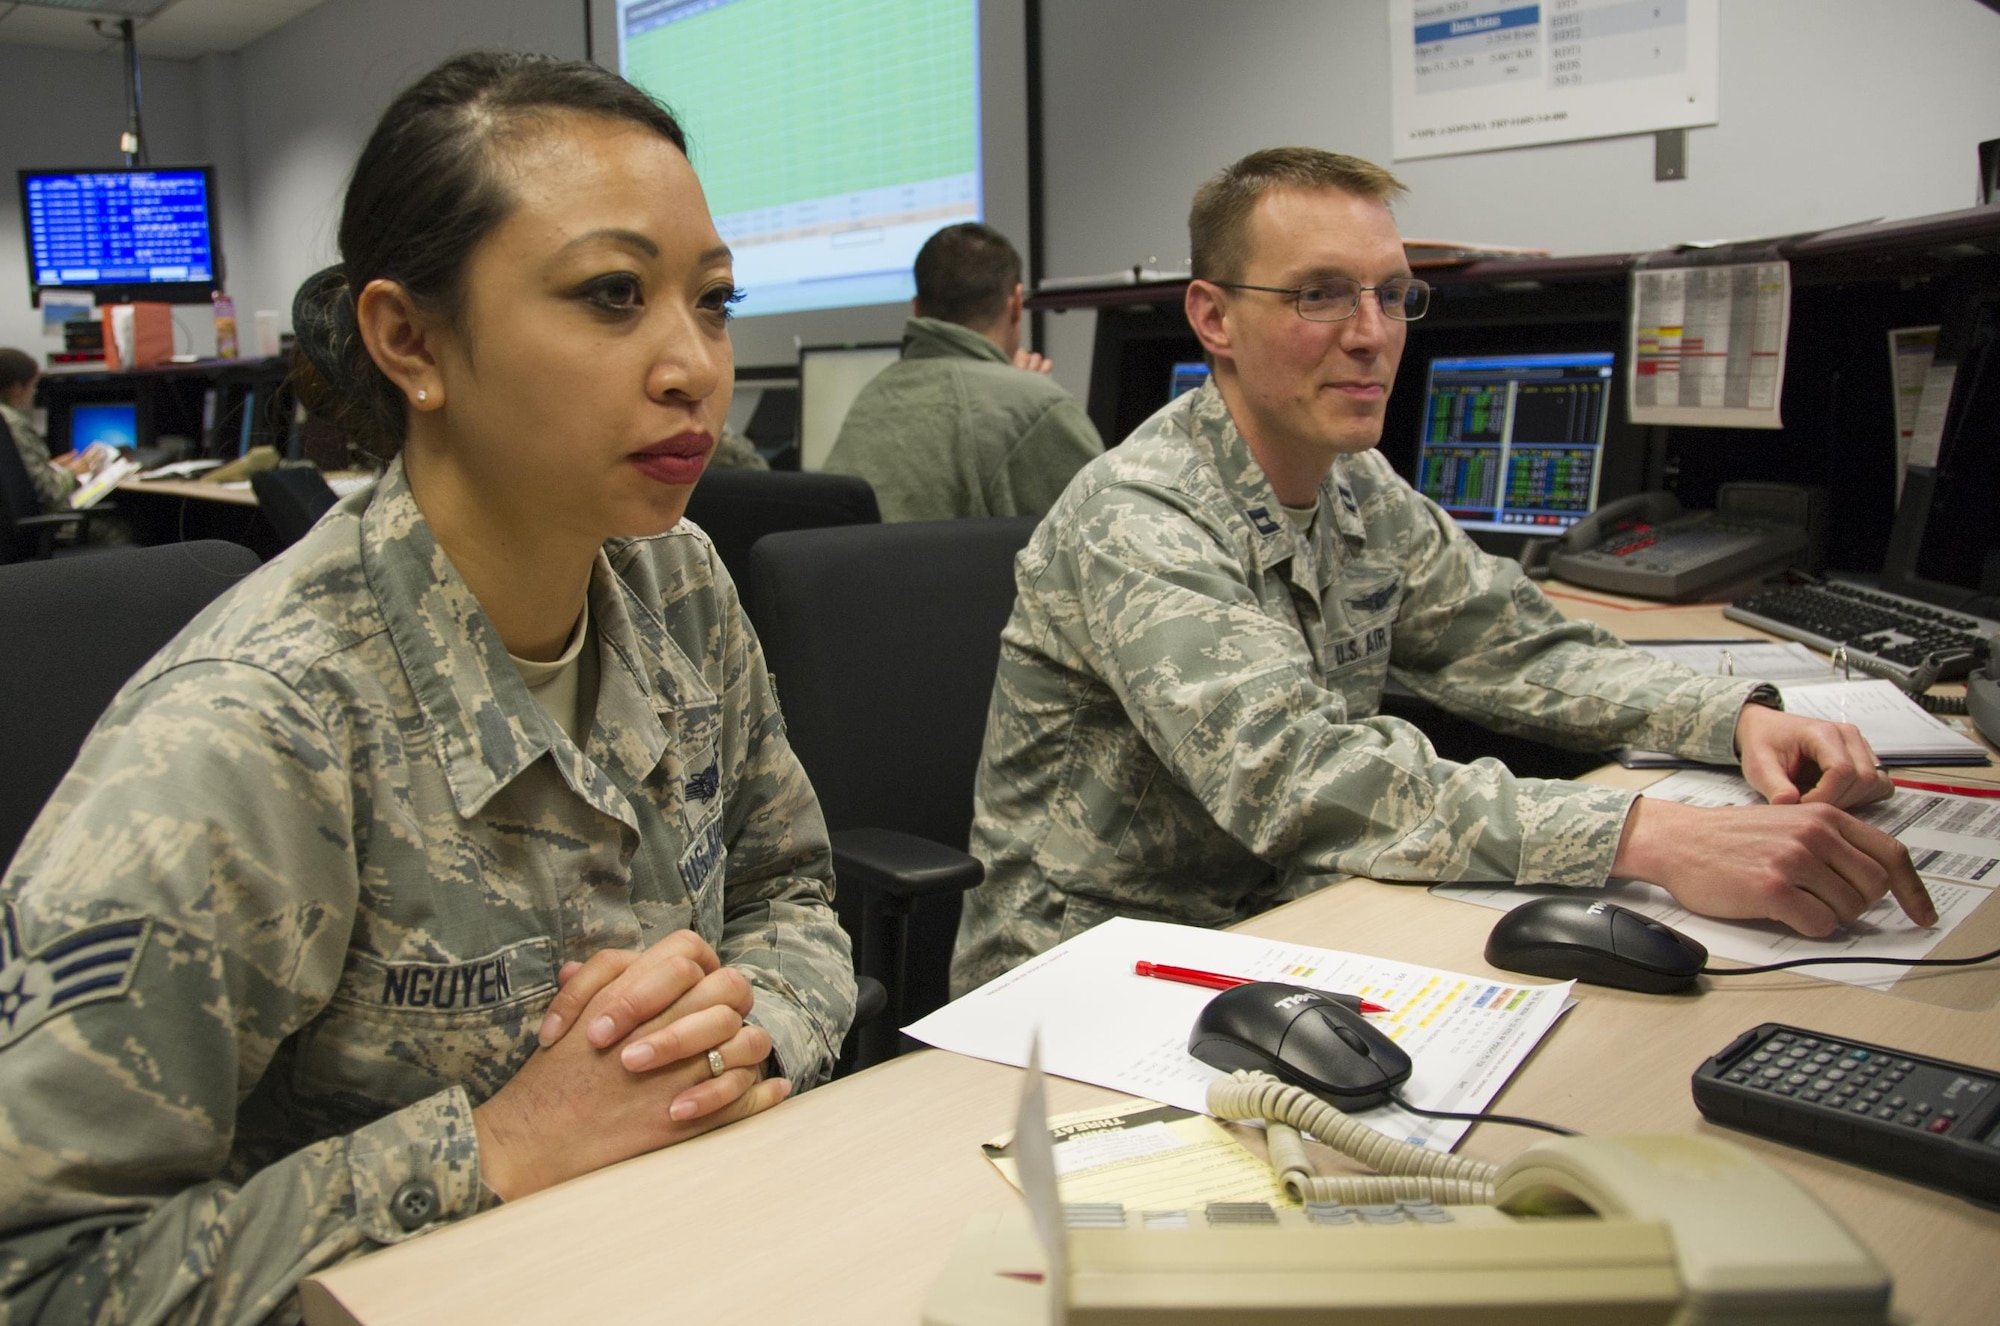 SCHRIEVER AIR FORCE BASE, Colo. -- Senior Airman Hannah Nguyen and Capt. Cuyler Gembol, 6th Space Operations Squadron, monitor satellite activity during a Continuity of Operations training event with the National Oceanic and Atmospheric Administration on Monday, Apr. 24th, 2017. 6 SOPS provides backup to NOAA, the main operators of the Defense Meteorological Satellite Program (DMSP) satellites, in the event that NOAA's systems become inoperable. (U.S. Air Force photo/Senior Airman Laura Turner)